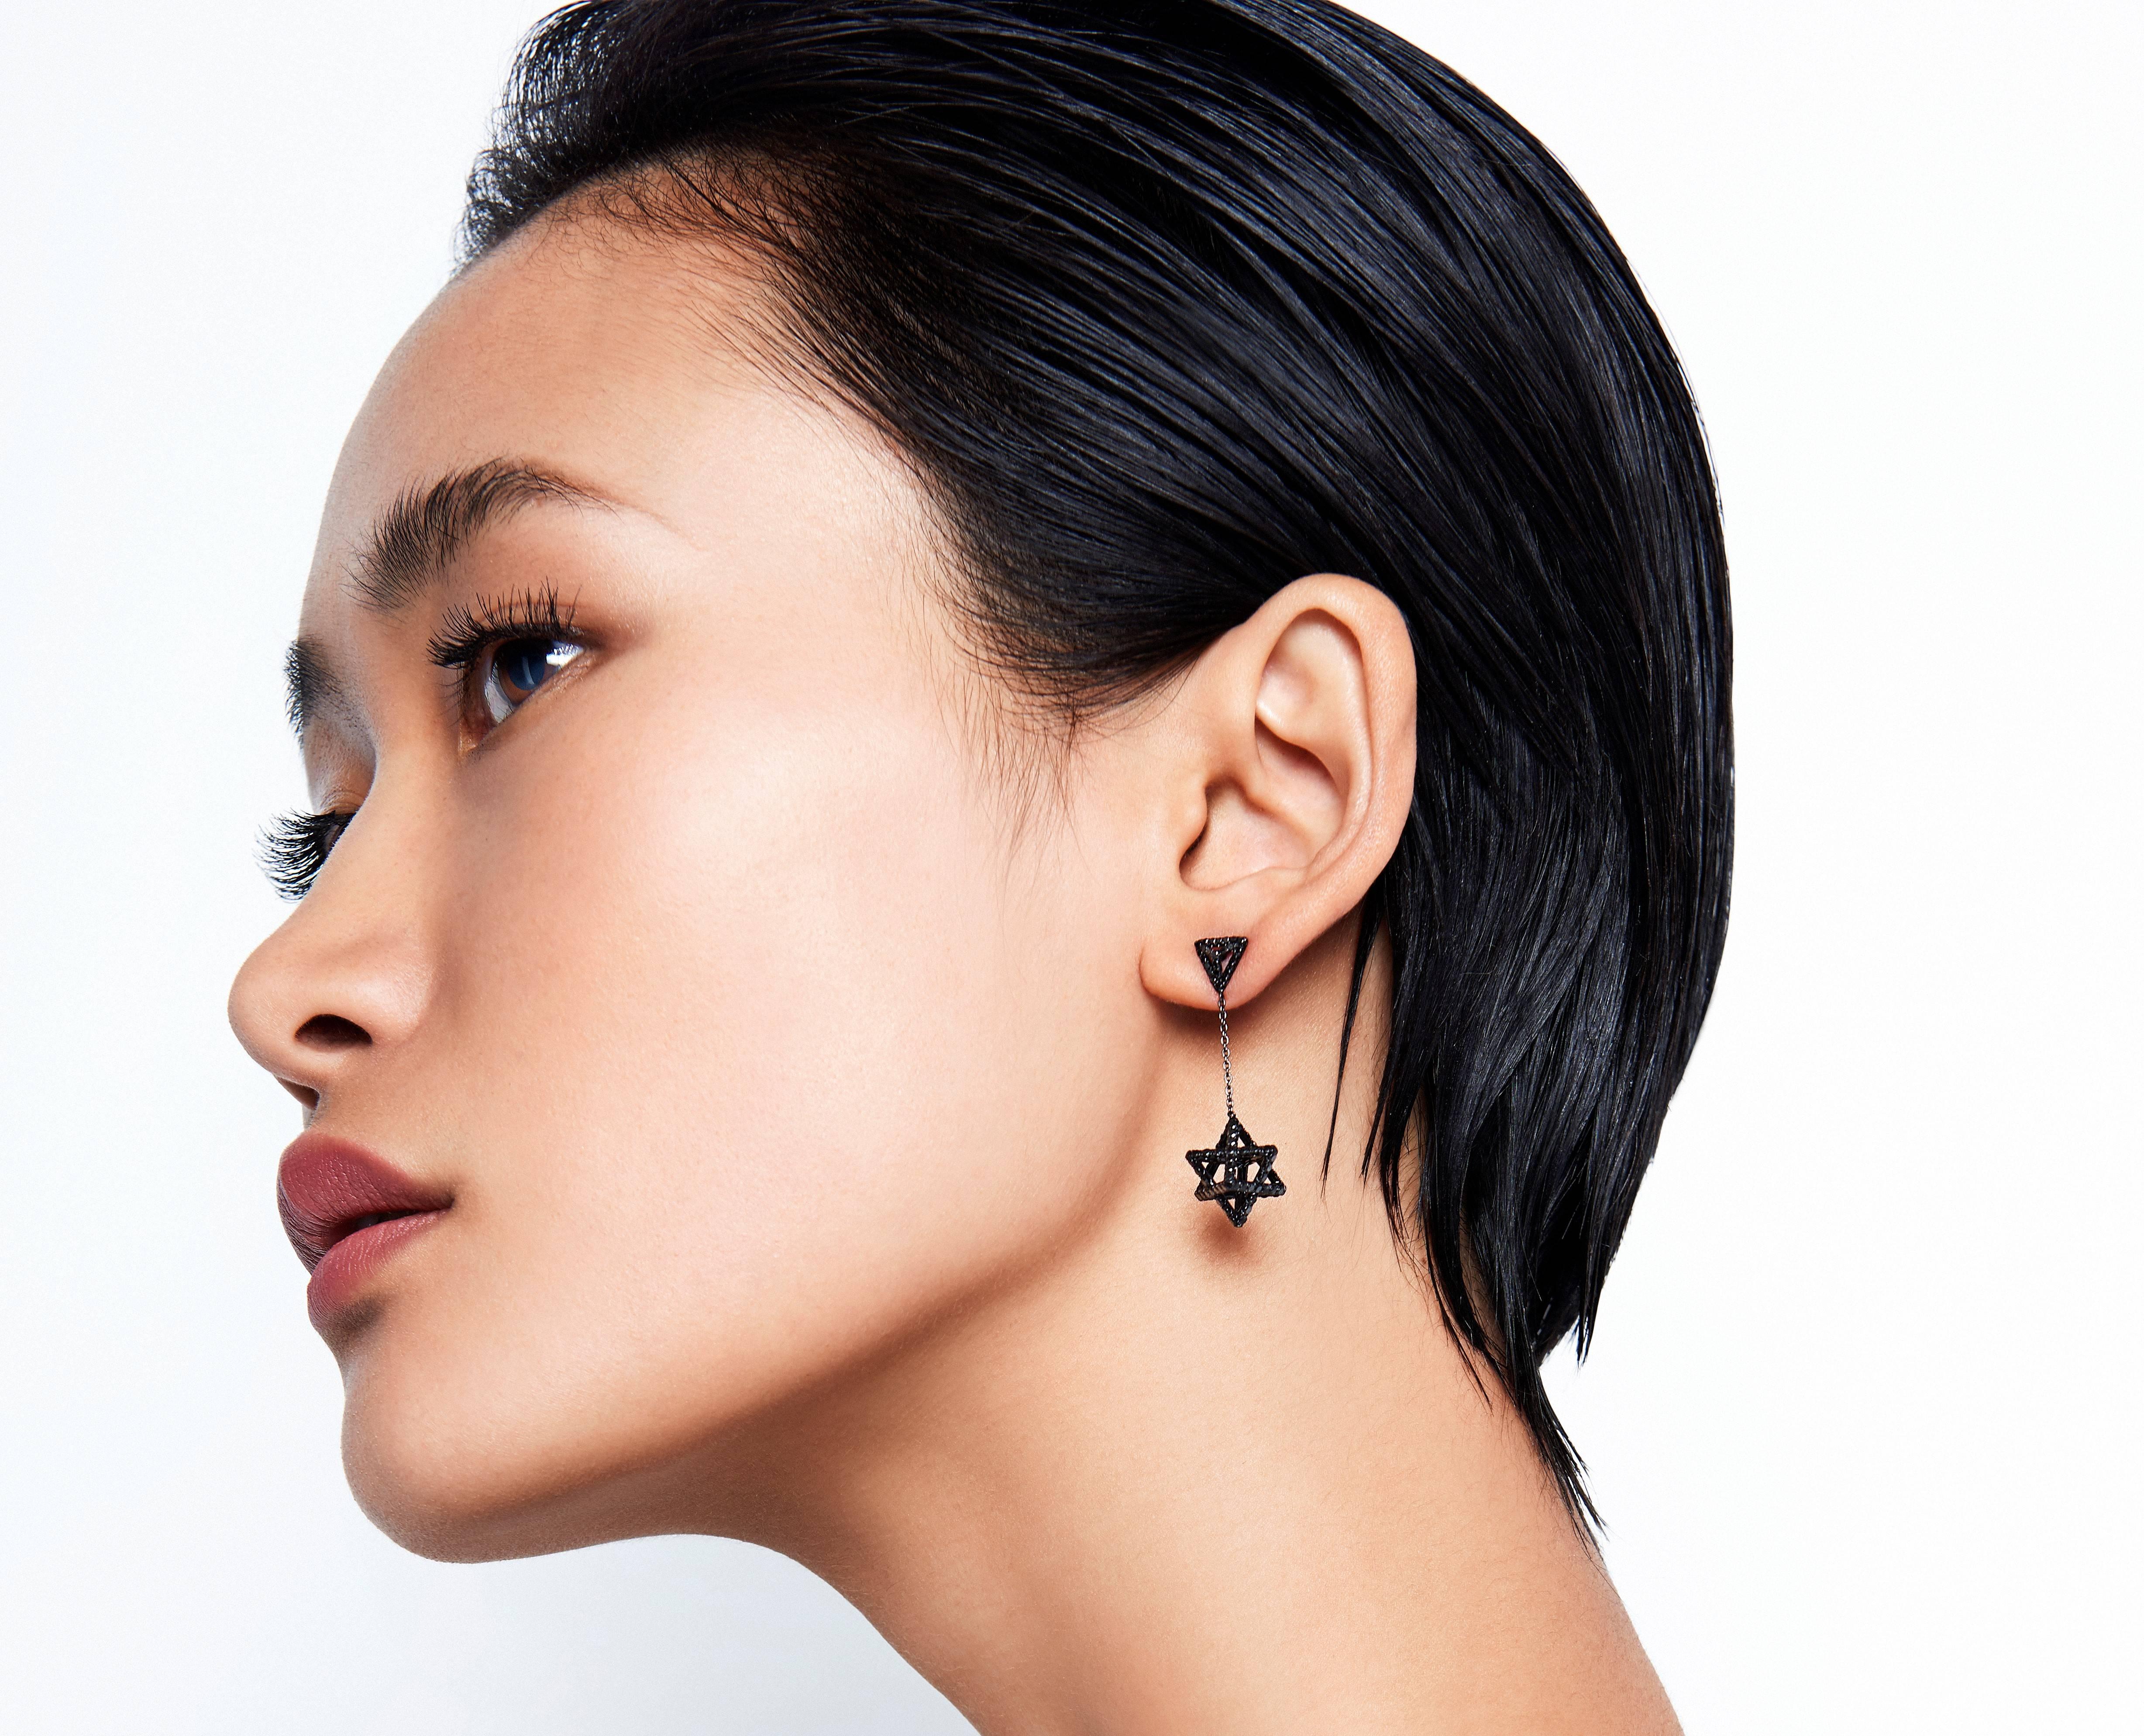 Merkaba black-finished platinum drop earrings, tethered by a triangle stud, feature a single chain suspending a Merkaba star measuring 0.57 inches. Set with a total of approximately 2.07 carats of round brilliant black diamonds. Secure screw backs